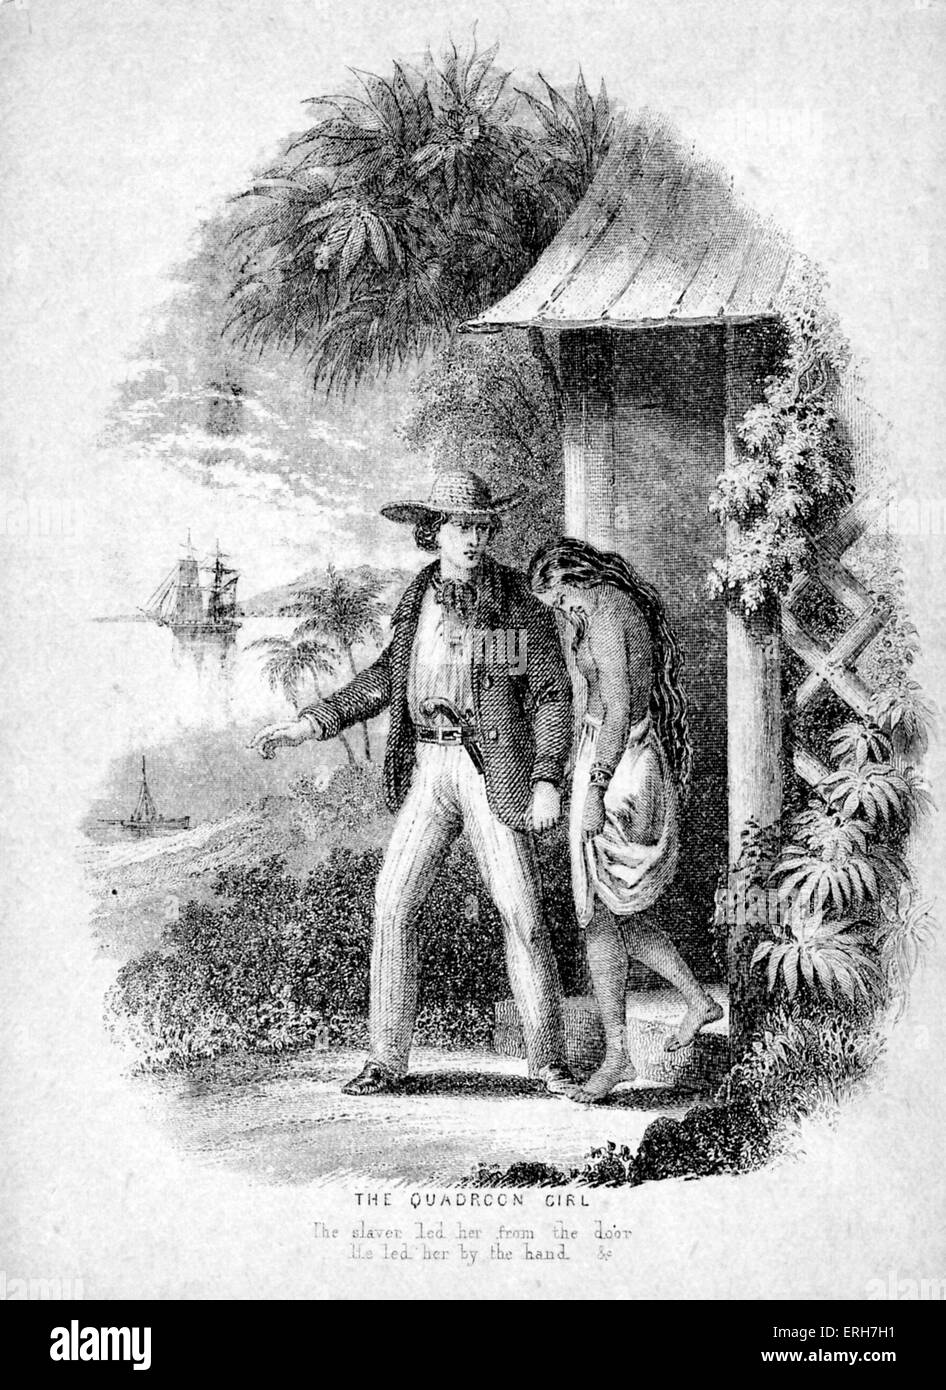 The Quadroon Girl illustration to 1885 epic poem The Song of Hiawatha - by Henry Wadsworth Longfellow . Caption:'The slaver led her from the door/ He led her by the hand'. Loosely based on legends and ethnography of the Ojibwe (Chippewa, Anishinaabeg) and other Native American peoples contained in Algic Researches (1839) and additional writings of Henry Rowe Schoolcraft. HWL: American poet and educator, 27 February 1807 – 24 March 1882. HRS: American geographer, geologist, and ethnologist, 28 March 1793 – 10 December 1864. Stock Photo